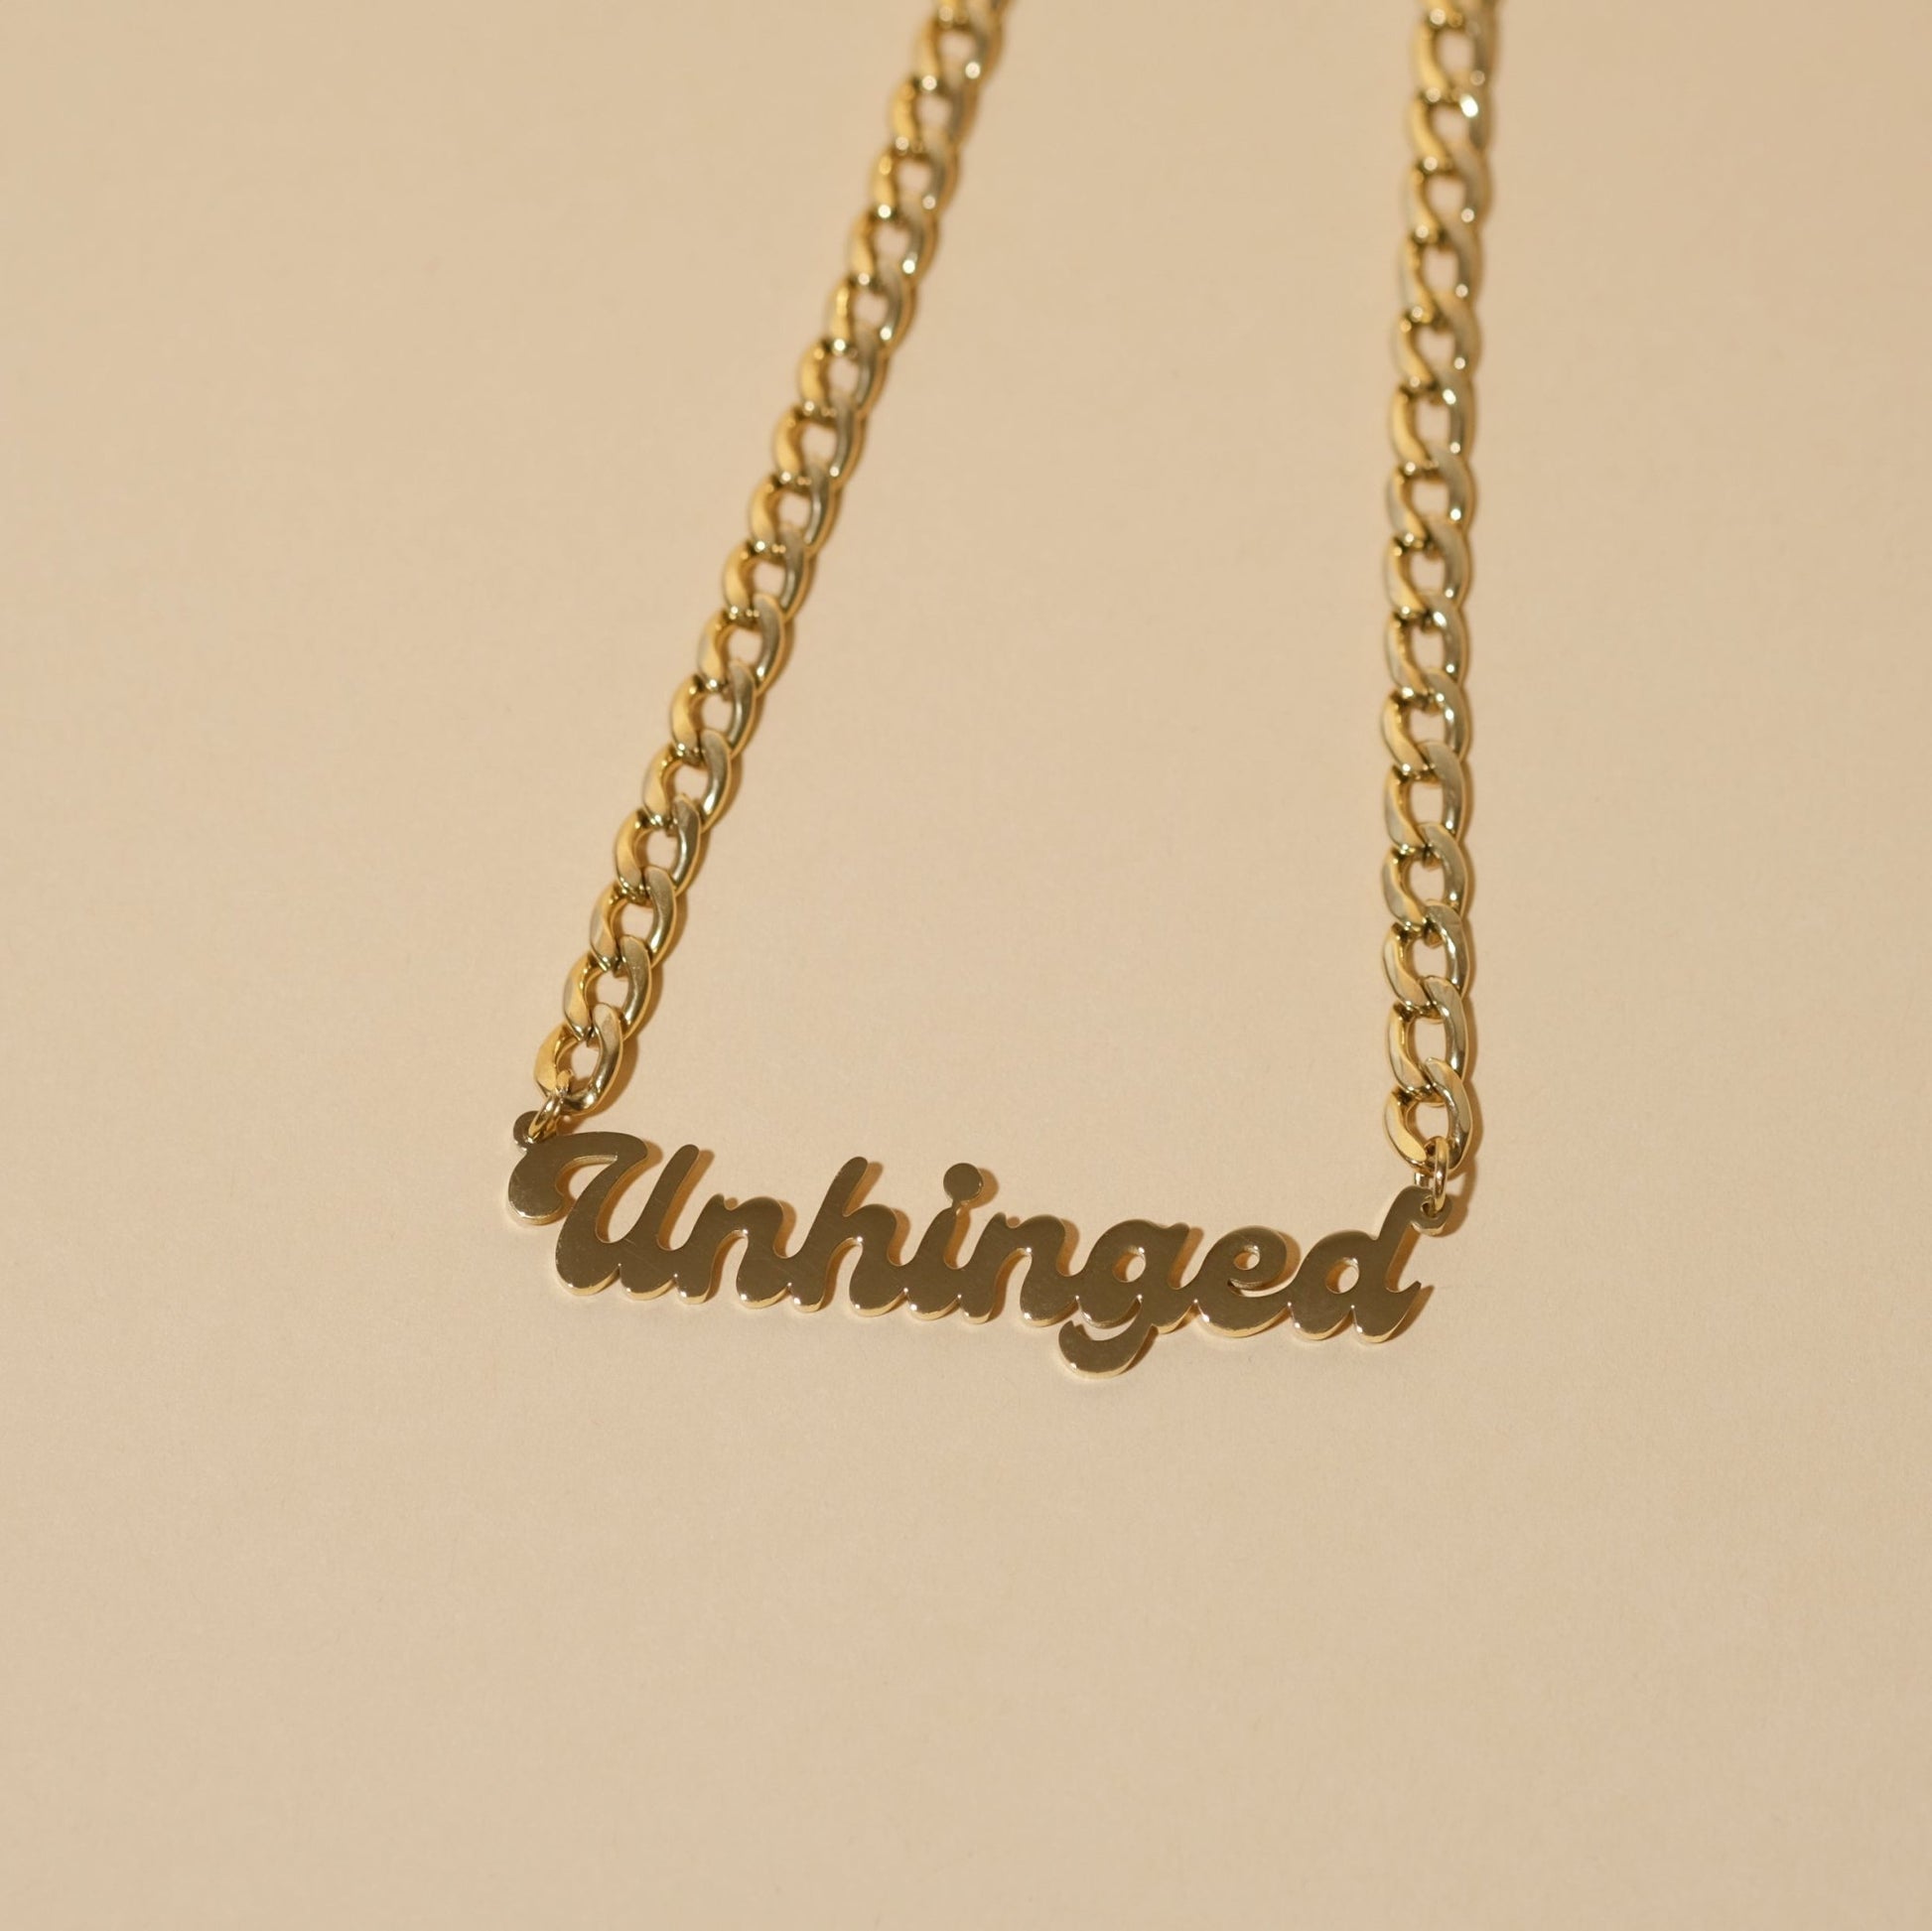 Unhinged Necklace by The Peach Fuzz - Sleepy Mountain